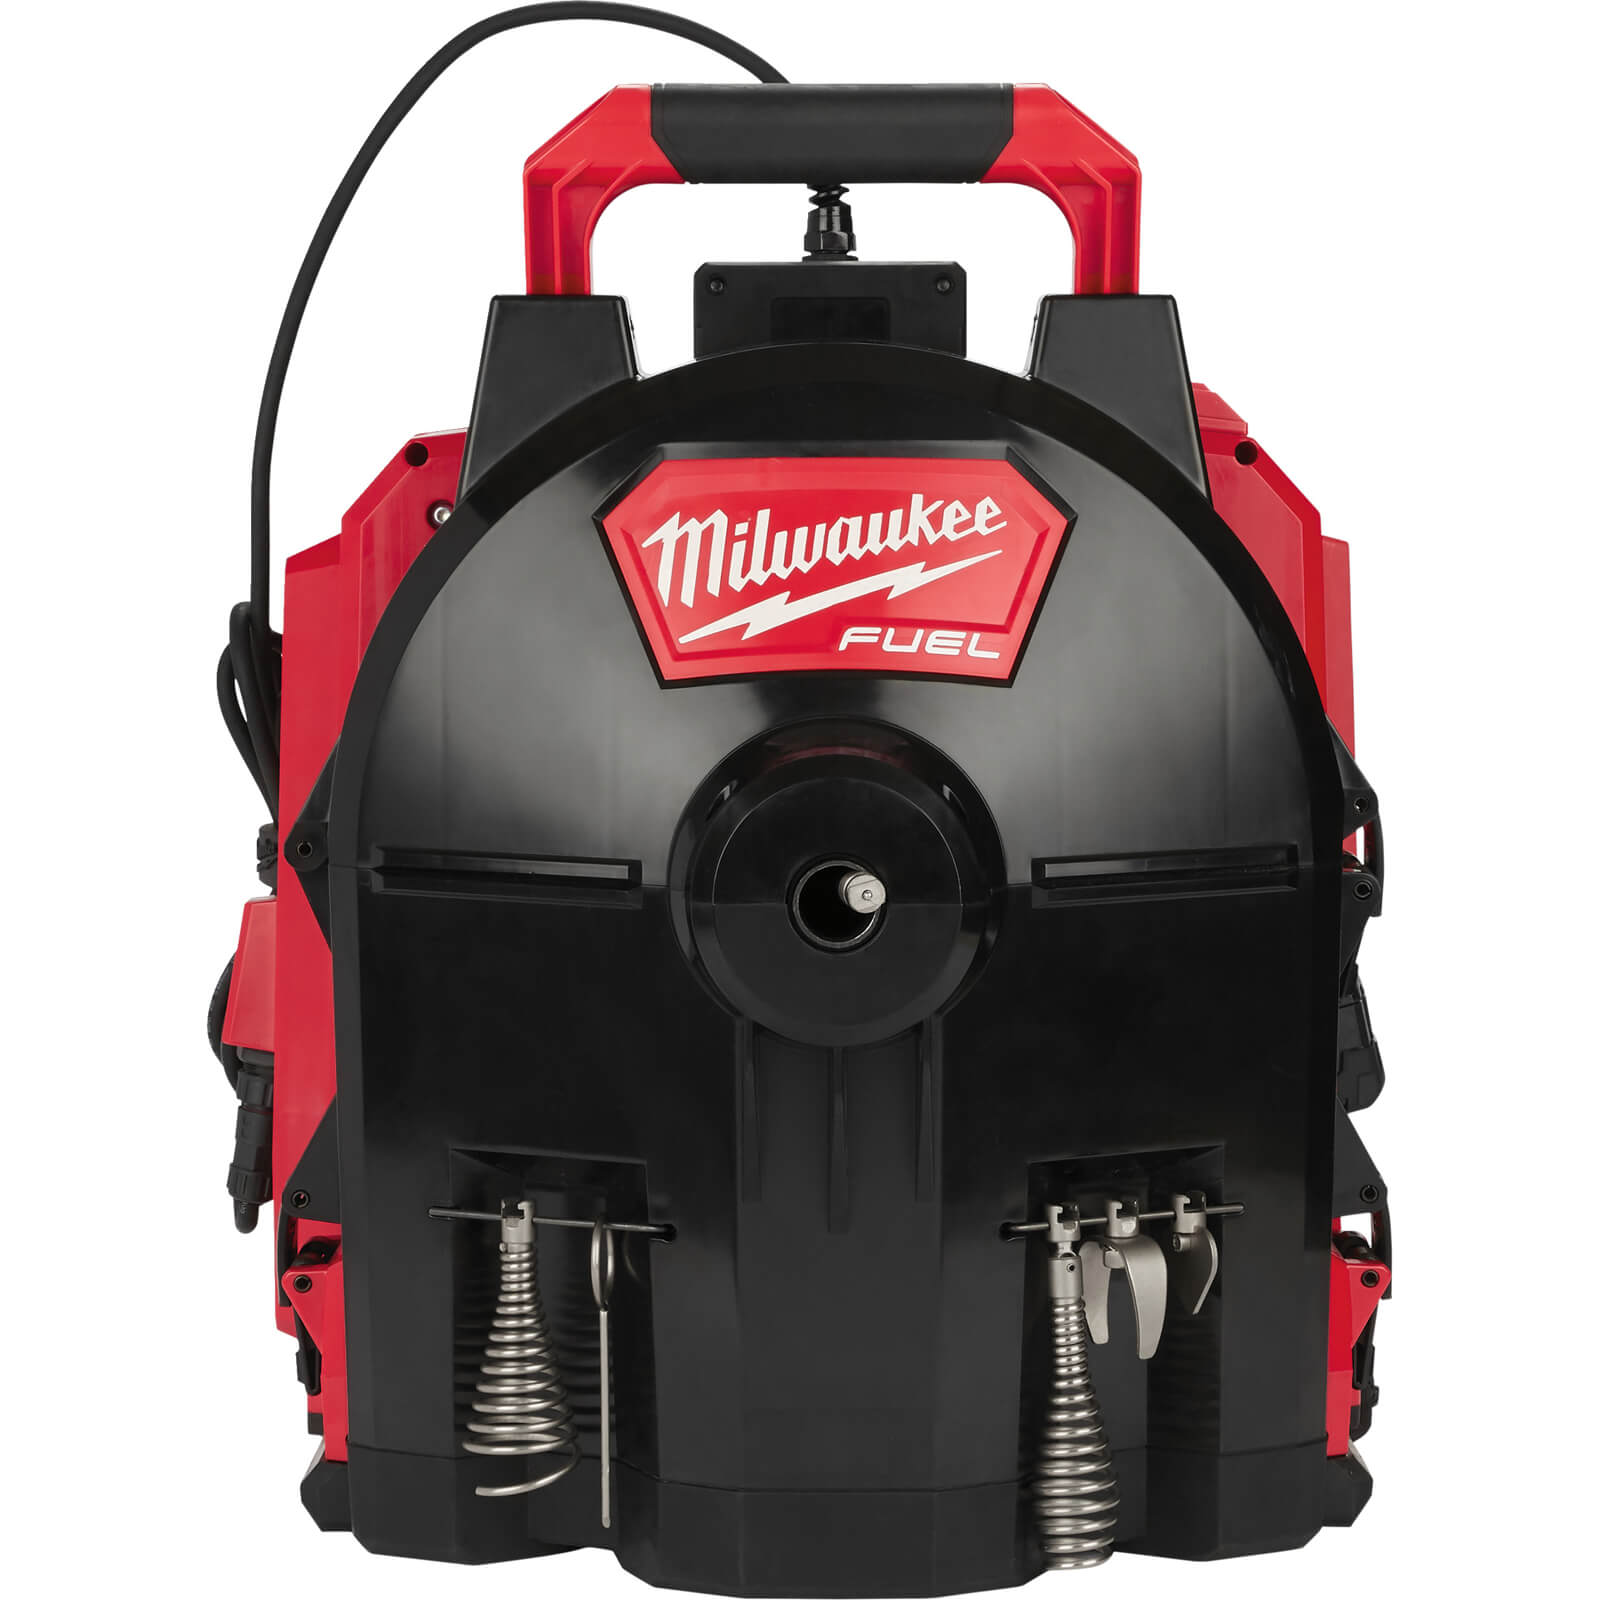 Image of Milwaukee M18 FFSDC16 Fuel 18v Cordless Brushless Drain Cleaner No Batteries No Charger No Case